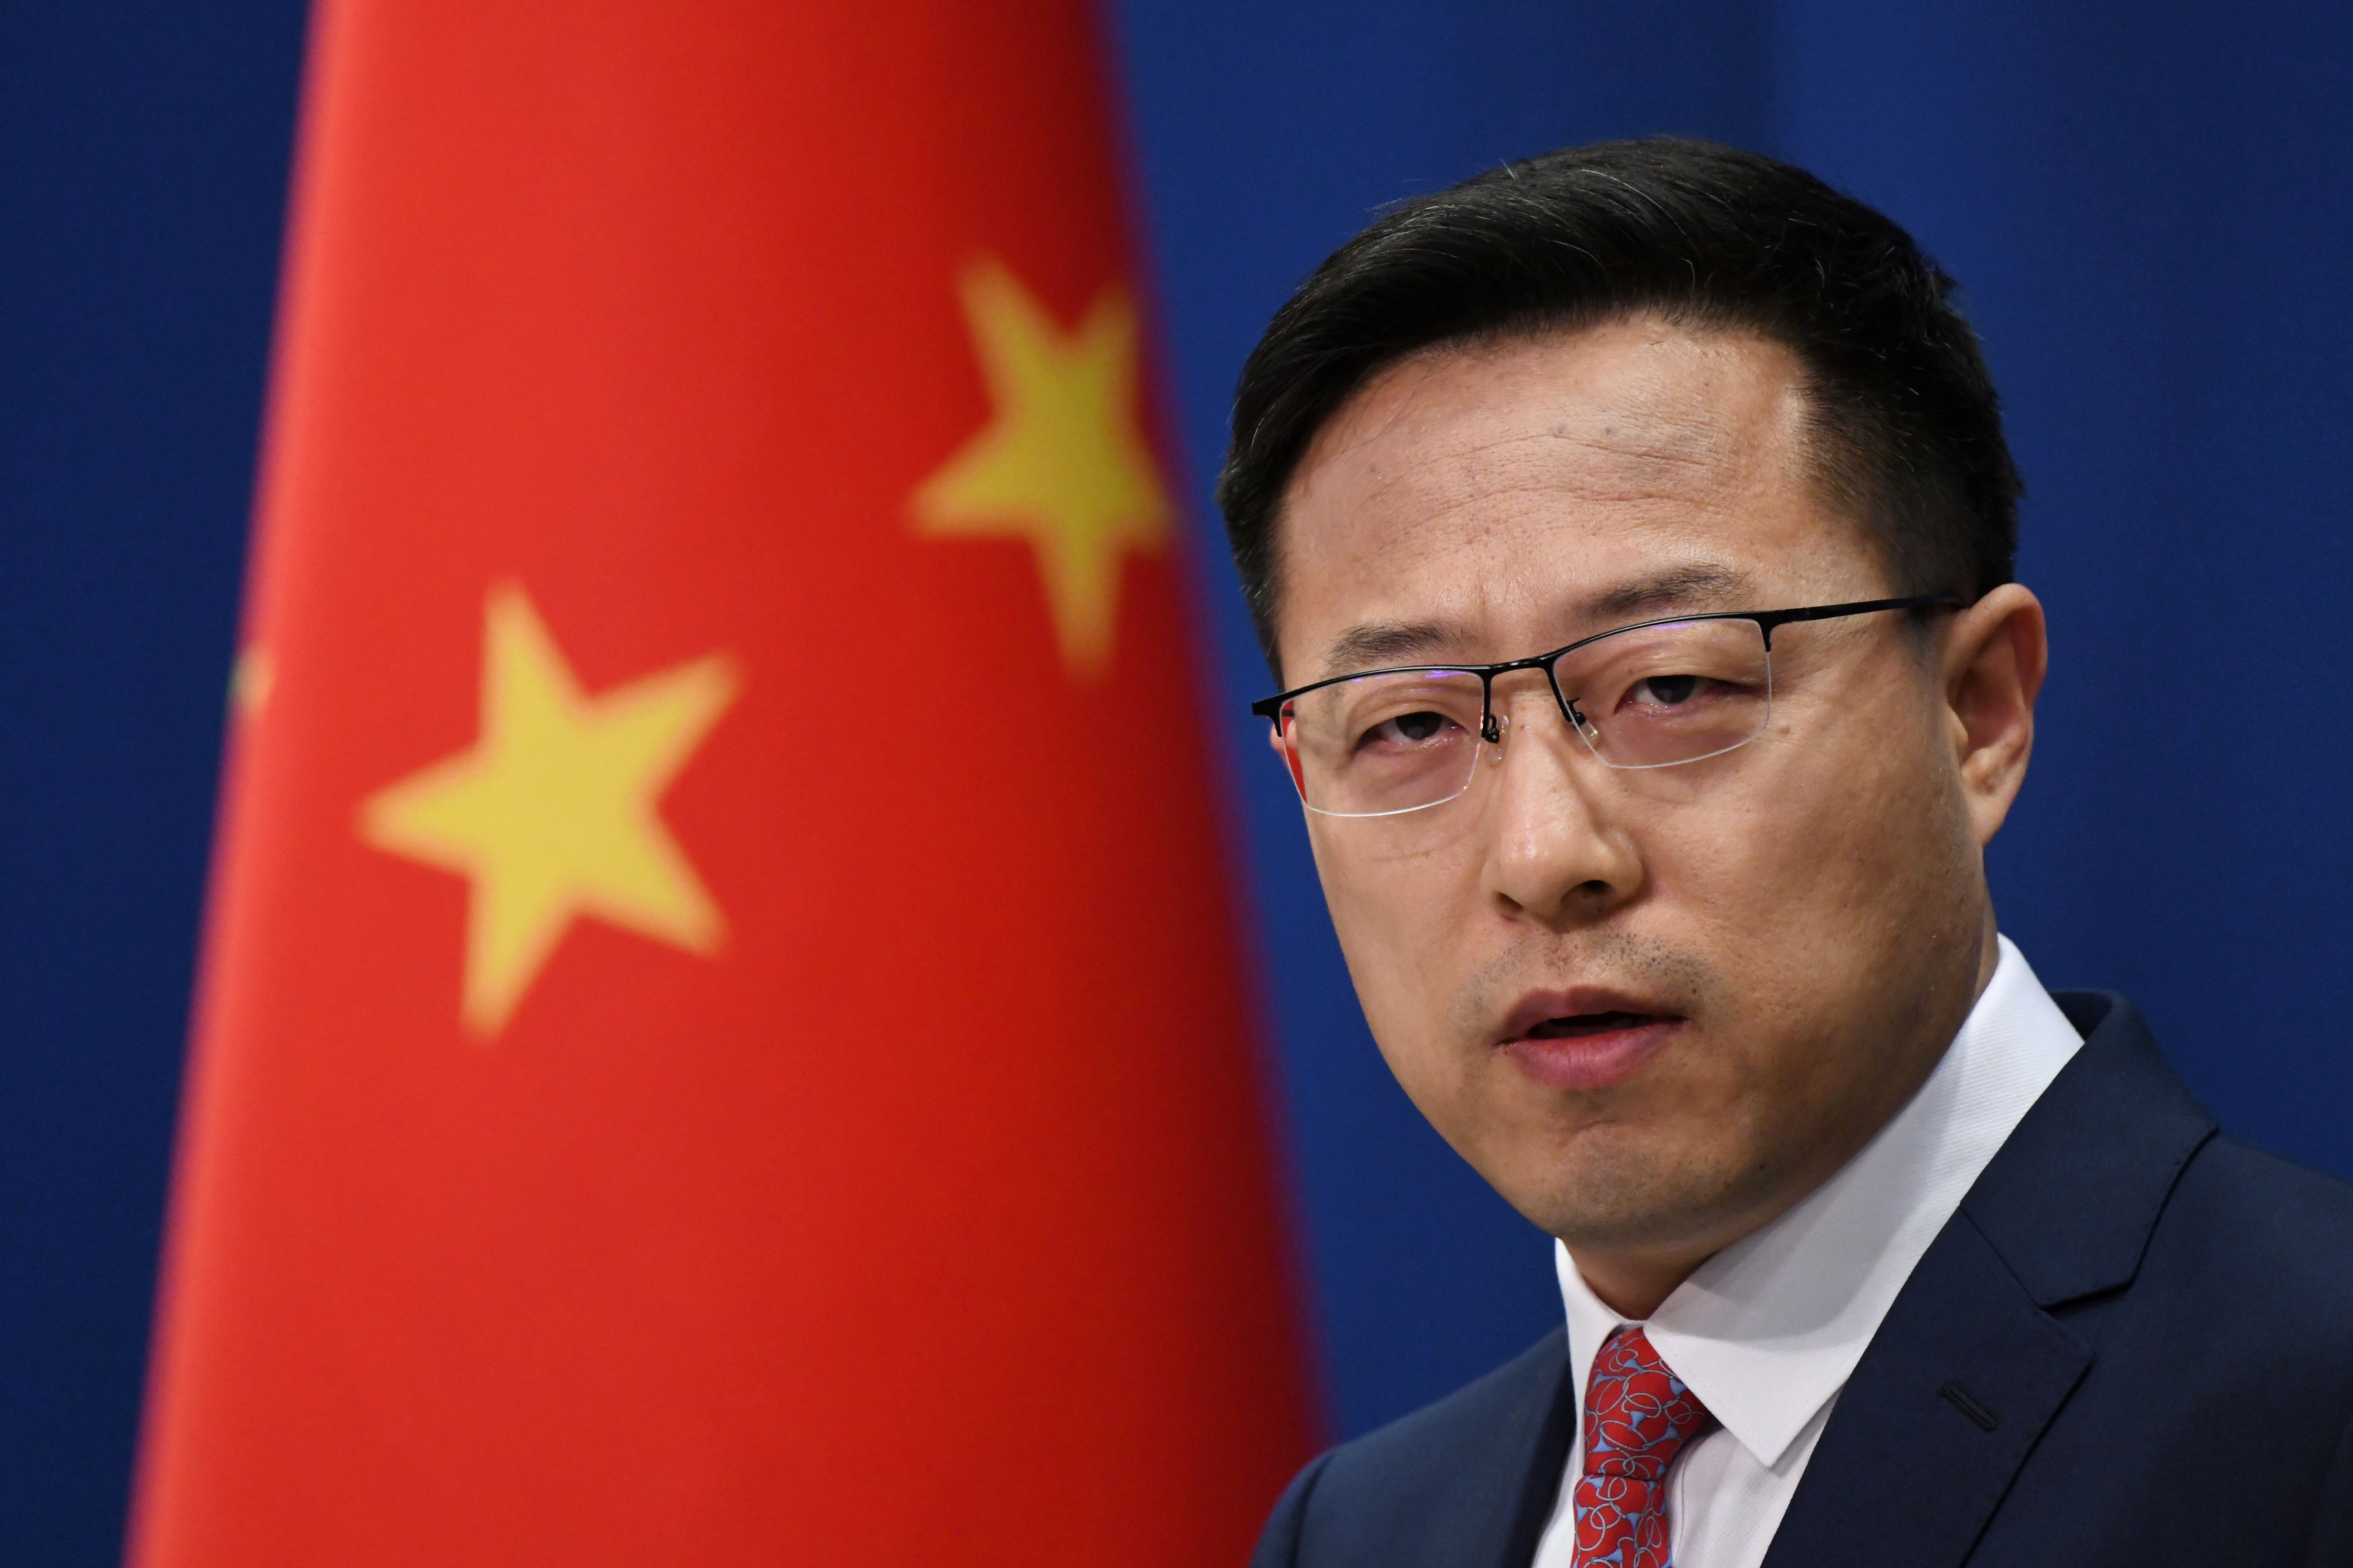 Zhao Lijian, a spokesperson for China's Foreign Ministry, speaks at a media briefing in Beijing on April 8.